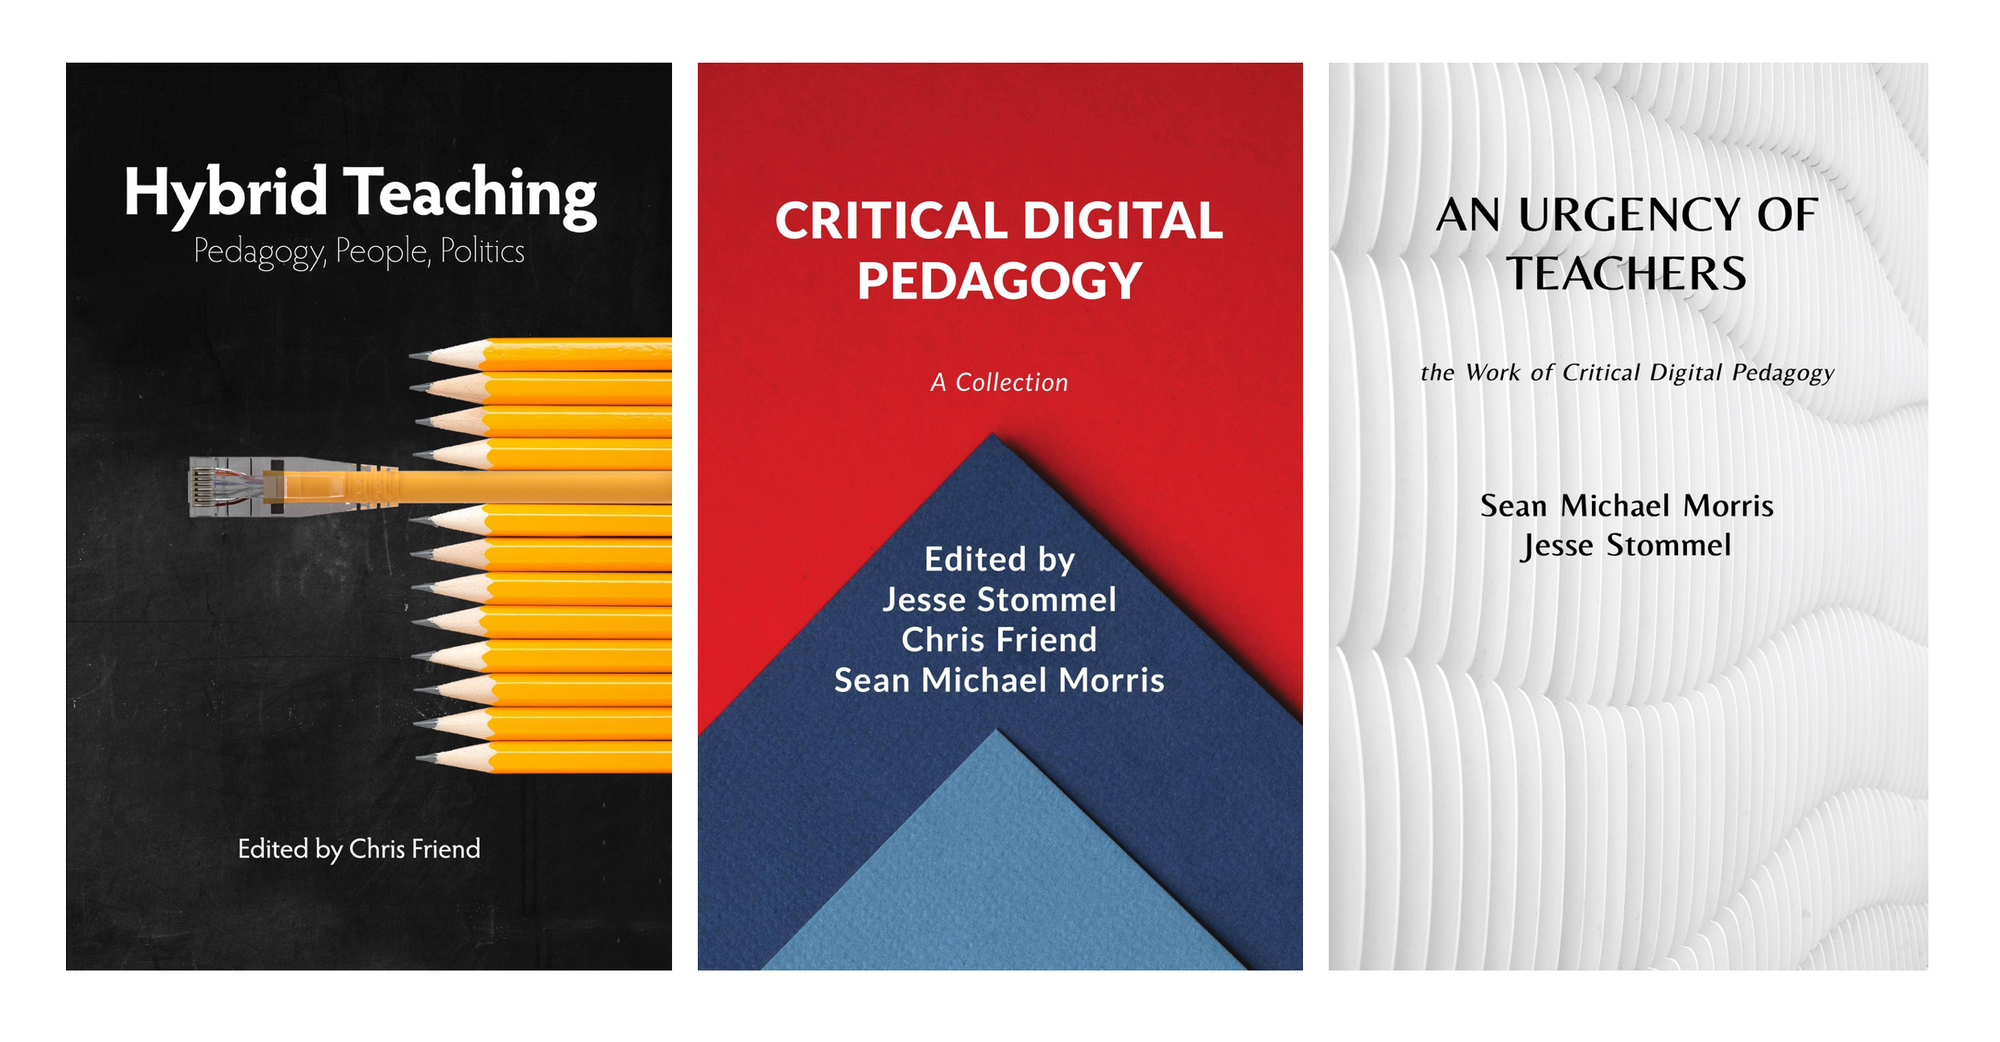 Three book covers: a set of pencils with an ethernet cable for Hybrid Teaching, three colors, red and two shades of blue, in triangular shape for Critical Digital Pedagogy, and White cards arranged in swirls for An Urgency of Teachers